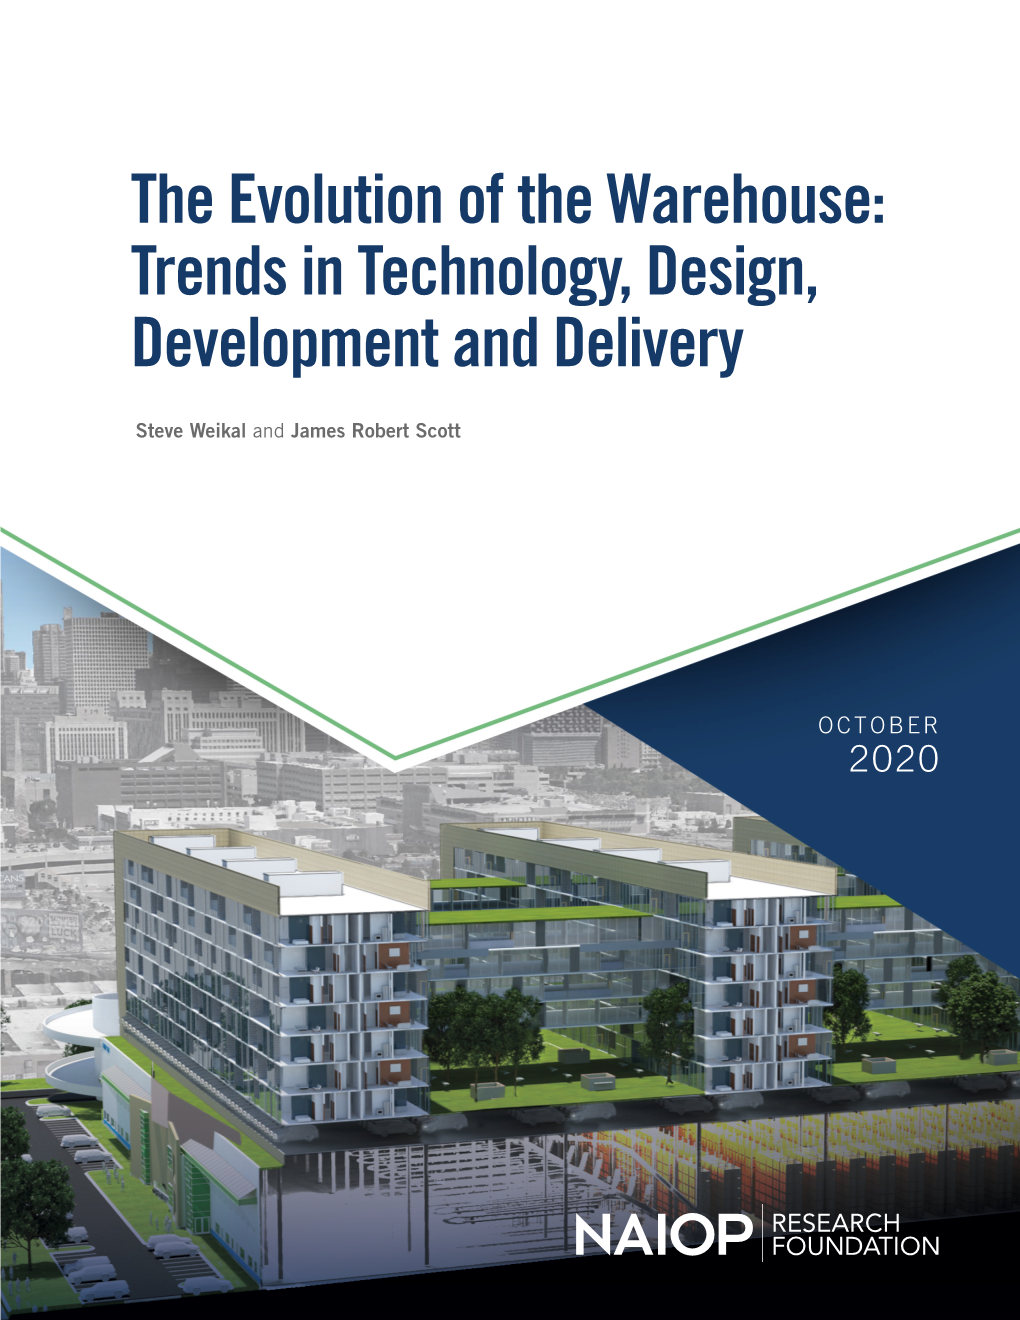 The Evolution of the Warehouse: Trends in Technology, Design, Development and Delivery